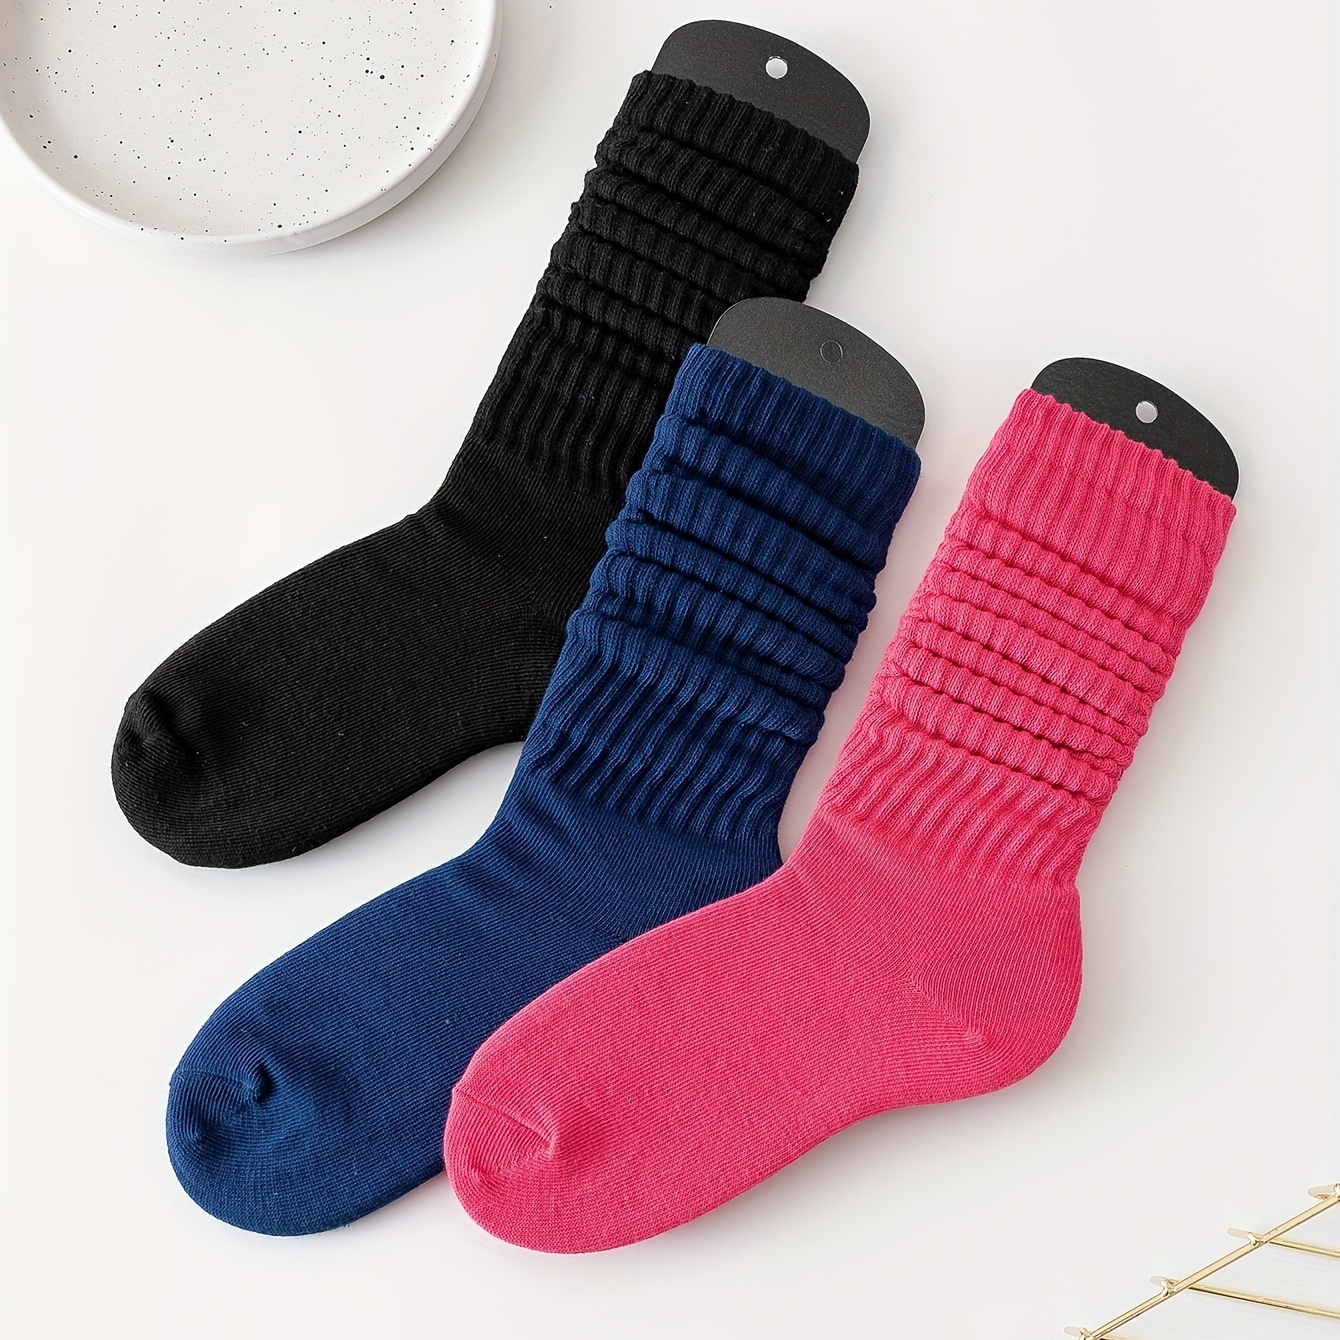 the daydream republic — Sheer Slouch Socks with Large + Small